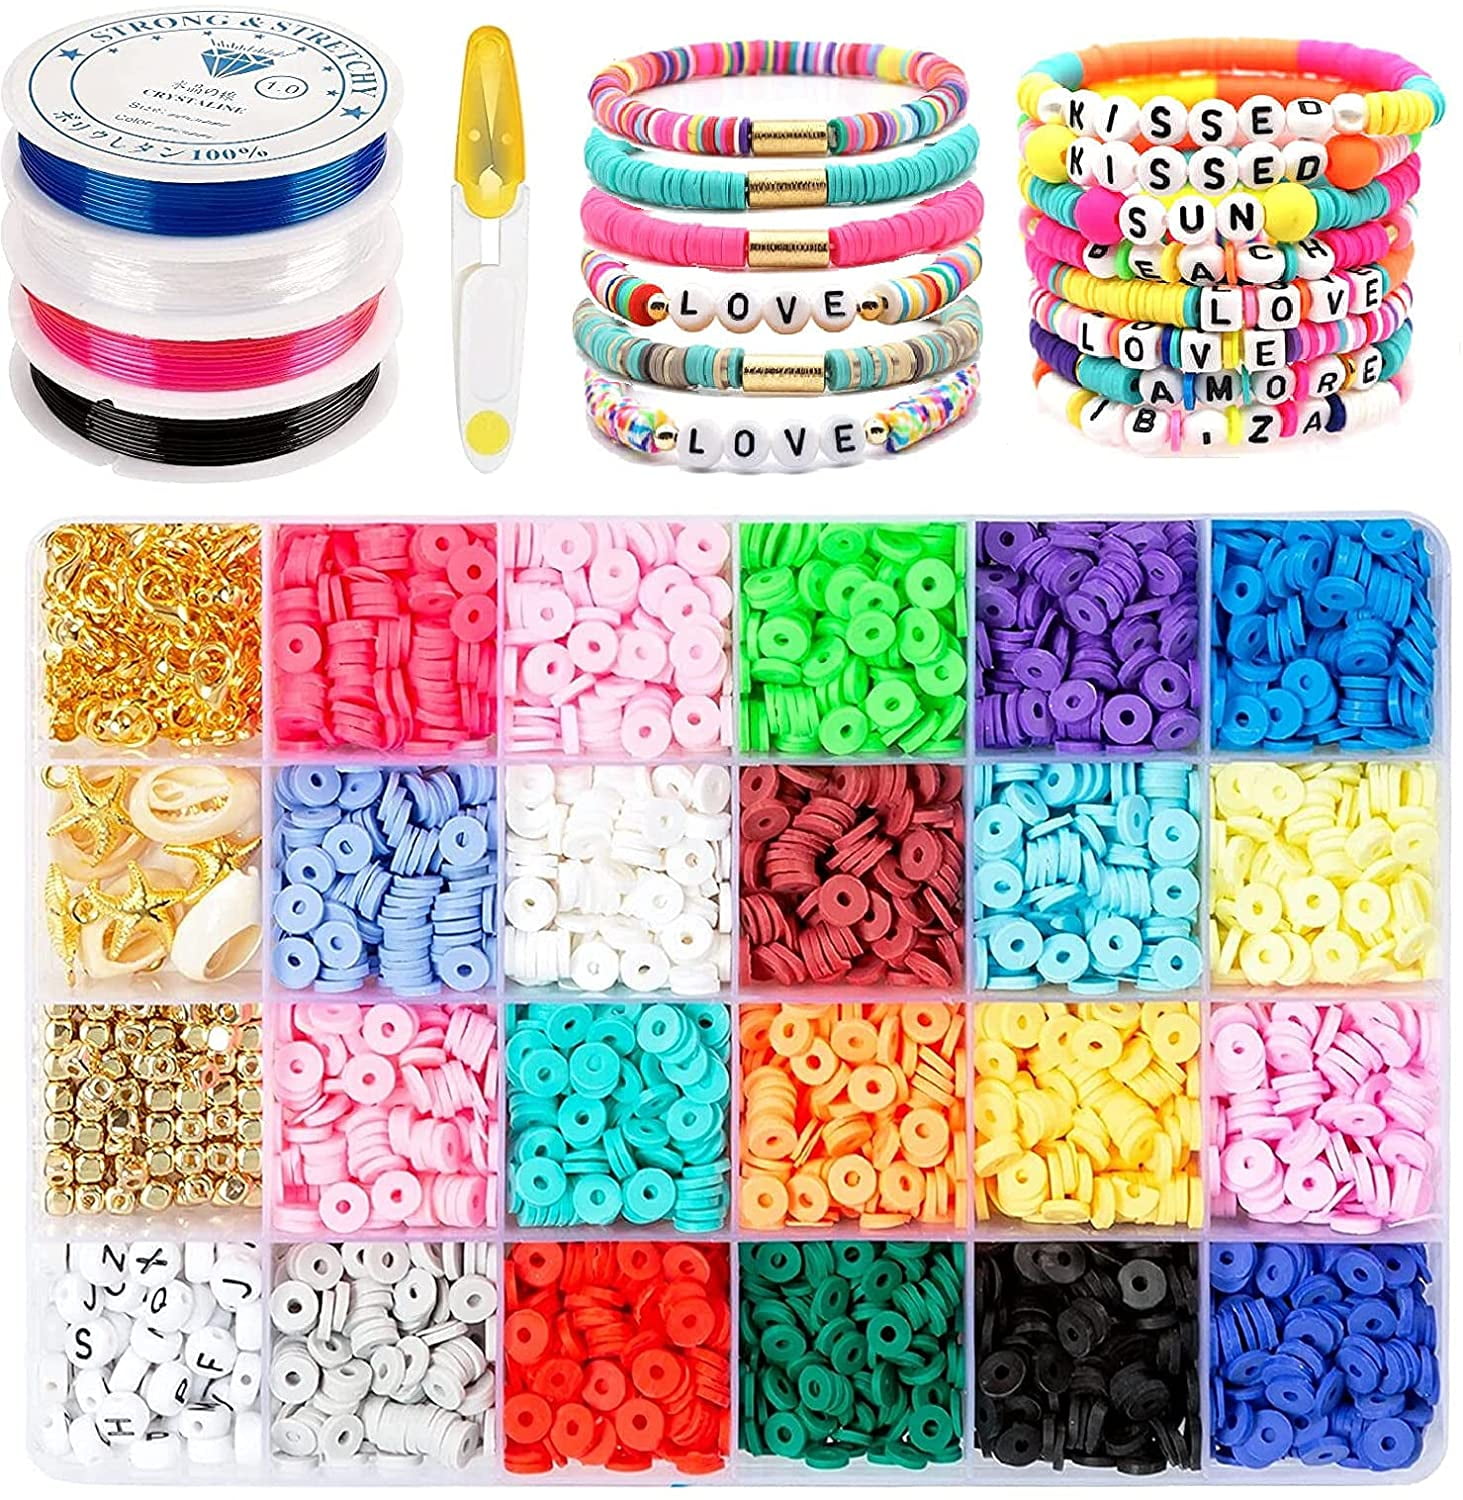 4800pcs Clay with Letter Beads for Bracelets, 20 Colors 6mm Flat Polymer Clay Spacer Beads with Elastic String and Pendant - Set, Women's, Size